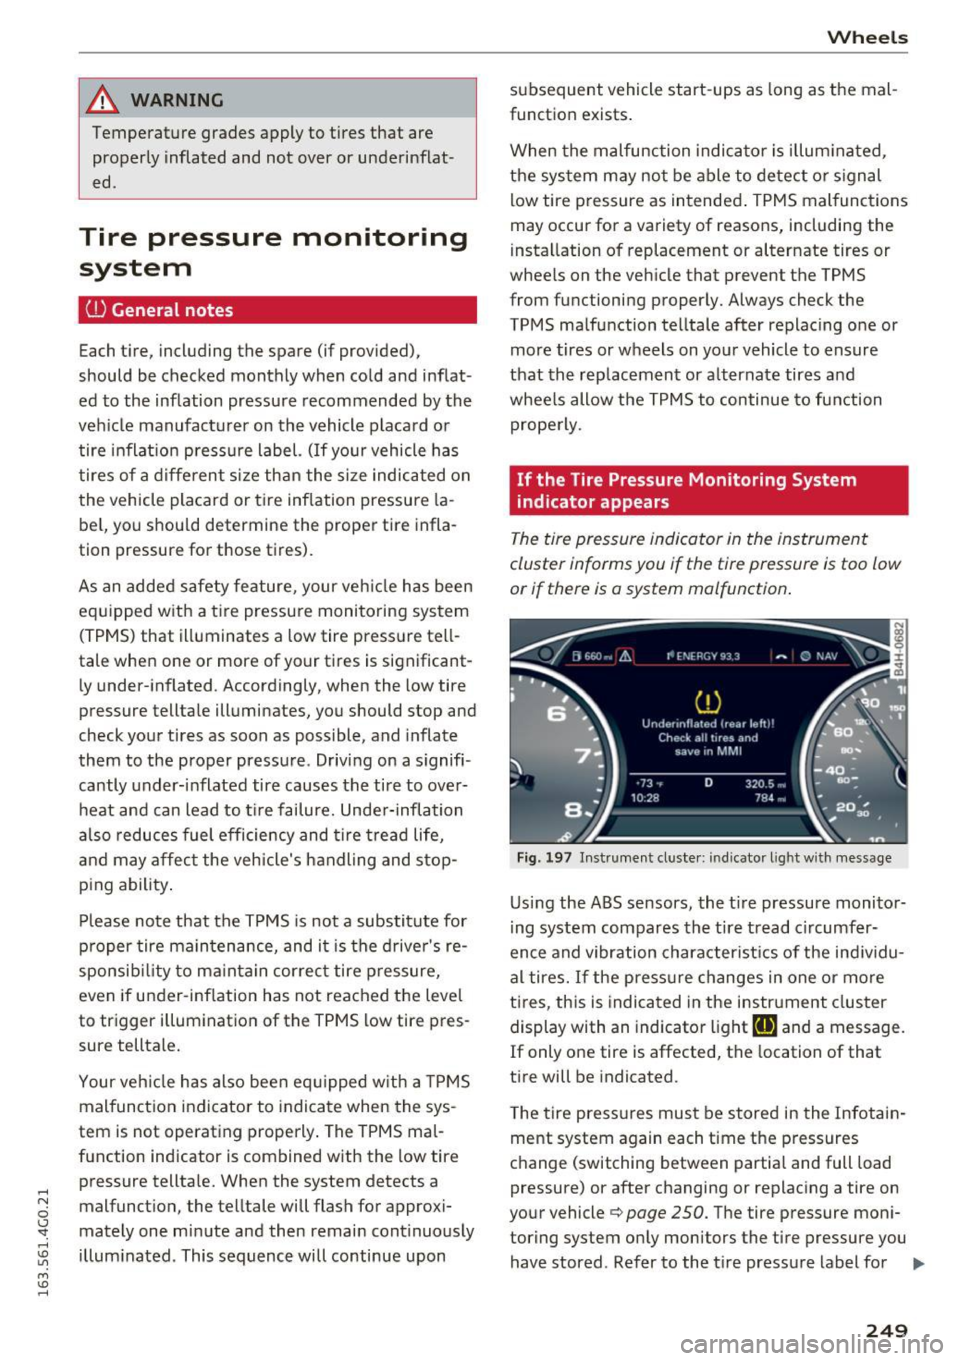 AUDI S6 2016  Owners Manual .... N 
0 CJ <I: .... I.Cl U"I 
M I.Cl ...... 
_& WARNING 
Temperature  grades  apply  to  tires  that  are properly  inflated and  not  over  or  underinflat­
ed . 
Tire  pressure  monitoring 
syst